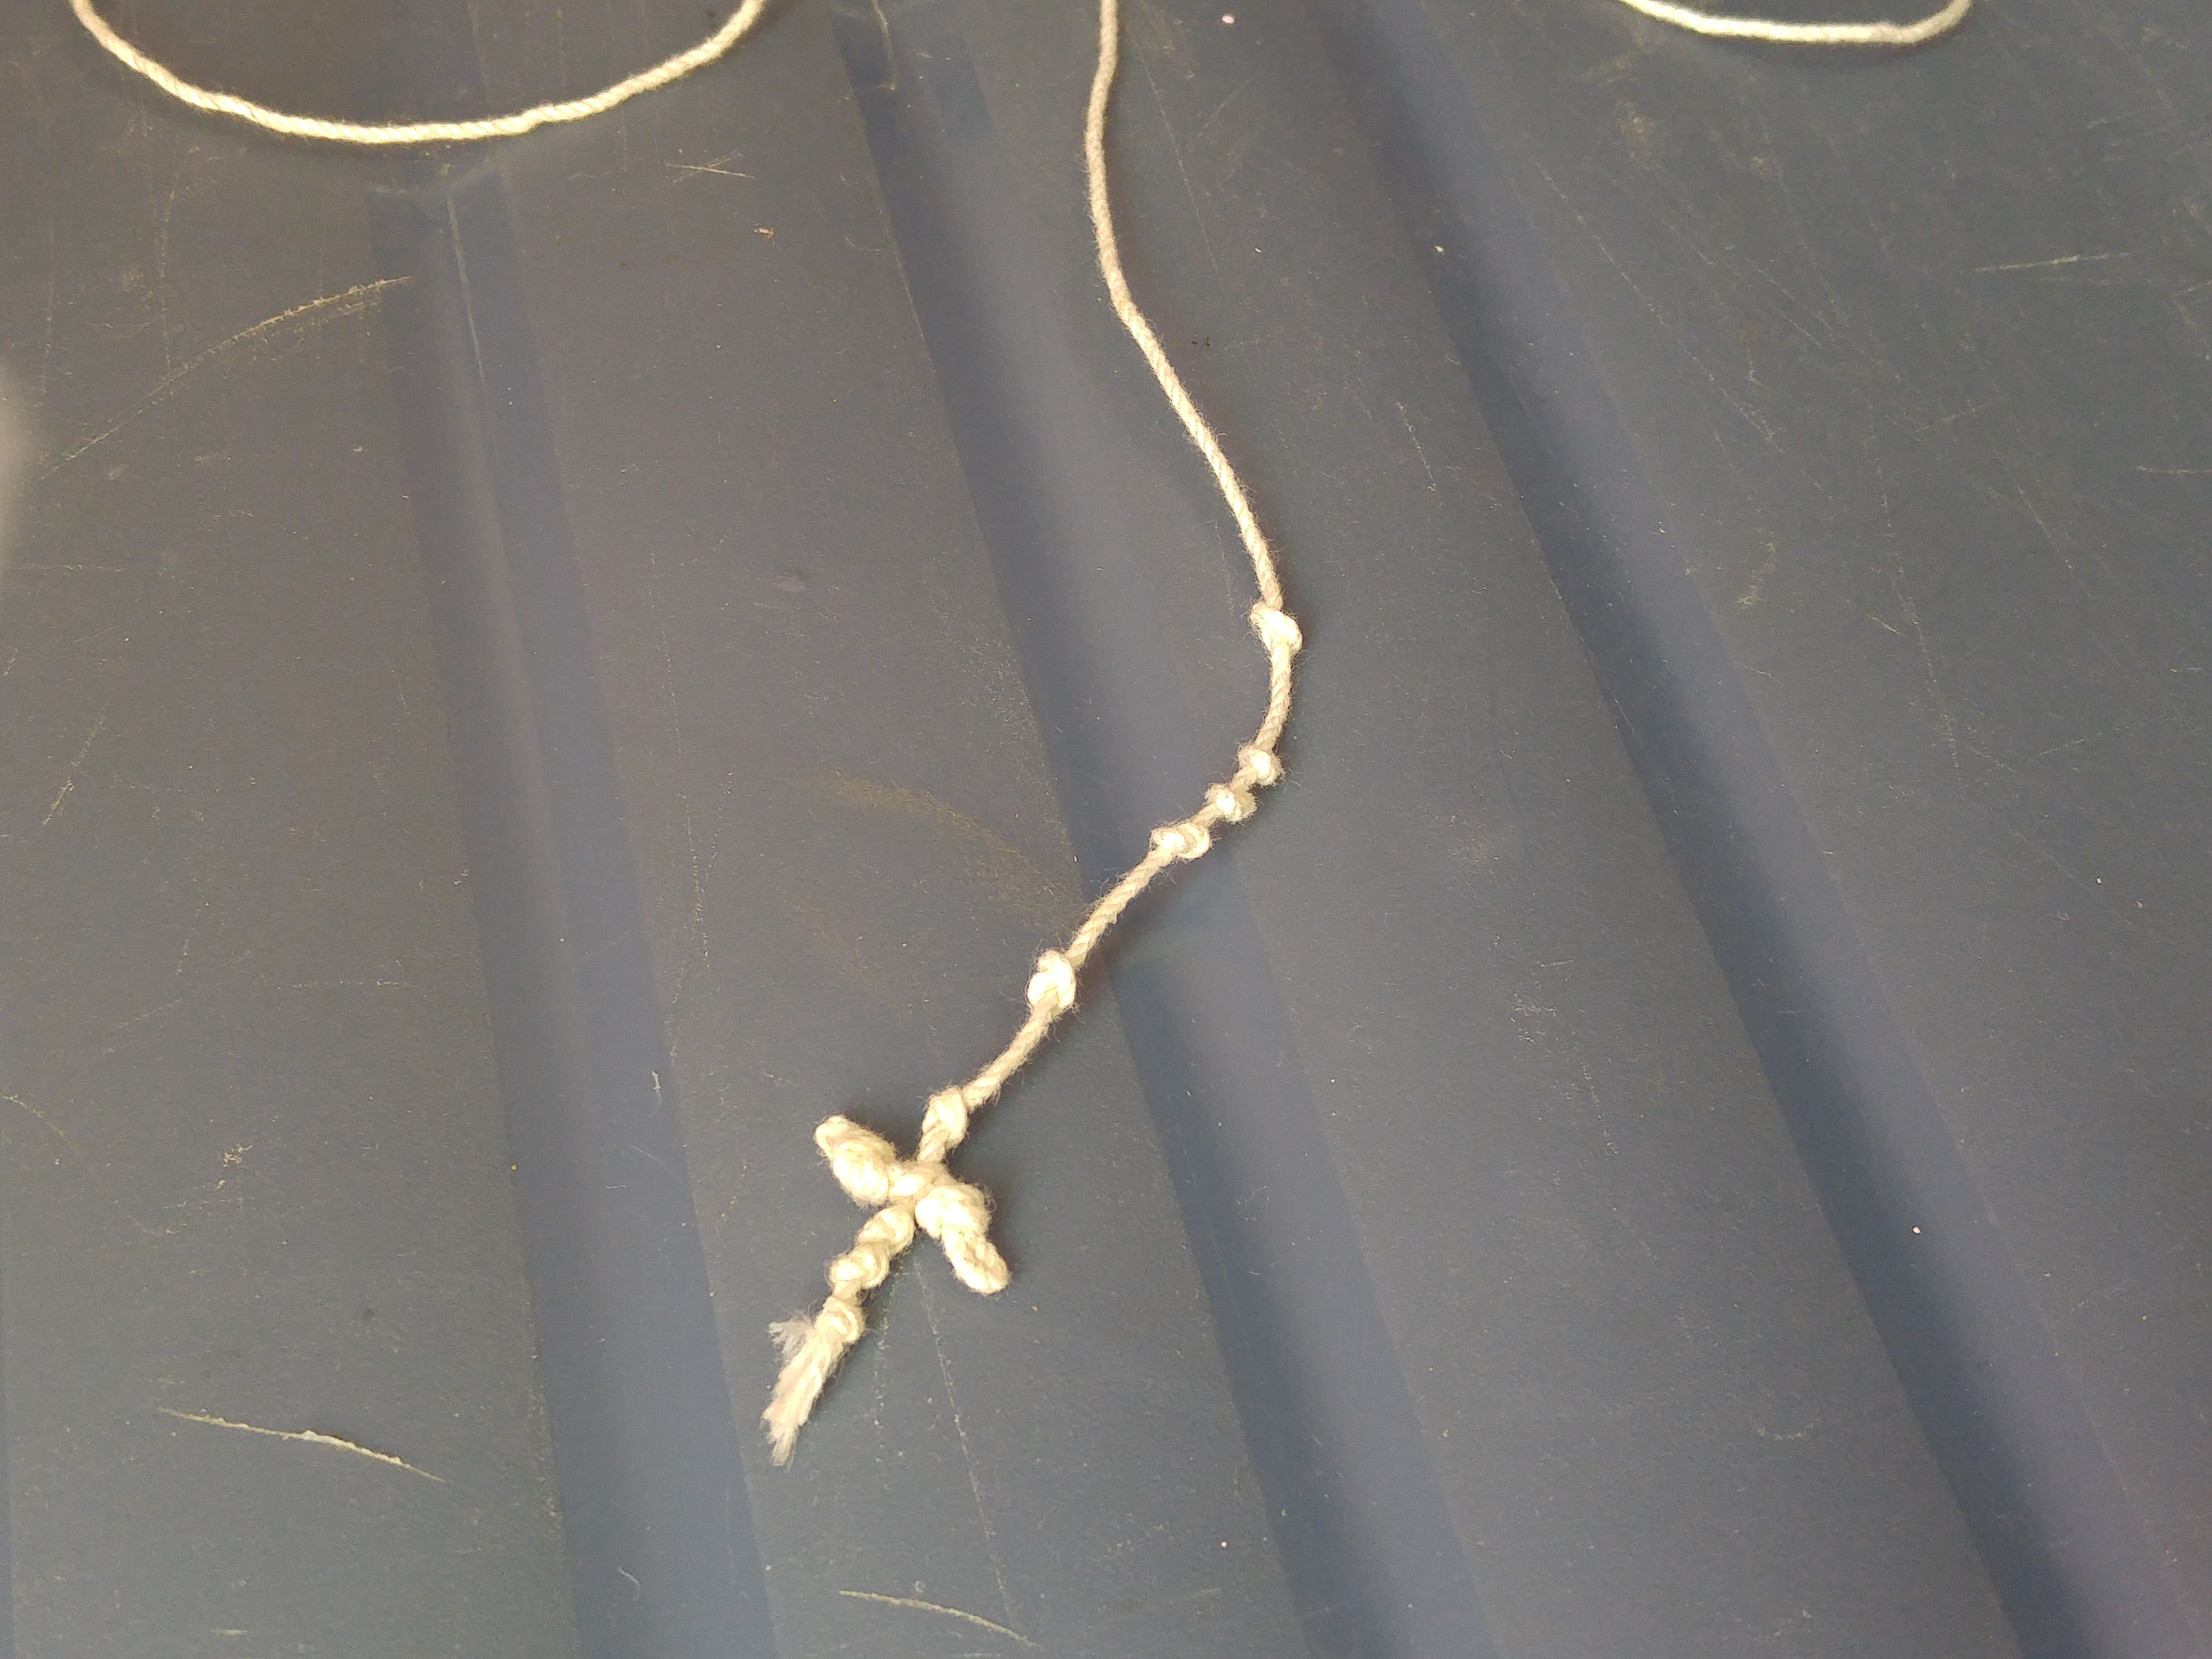 The first five knots in the string.